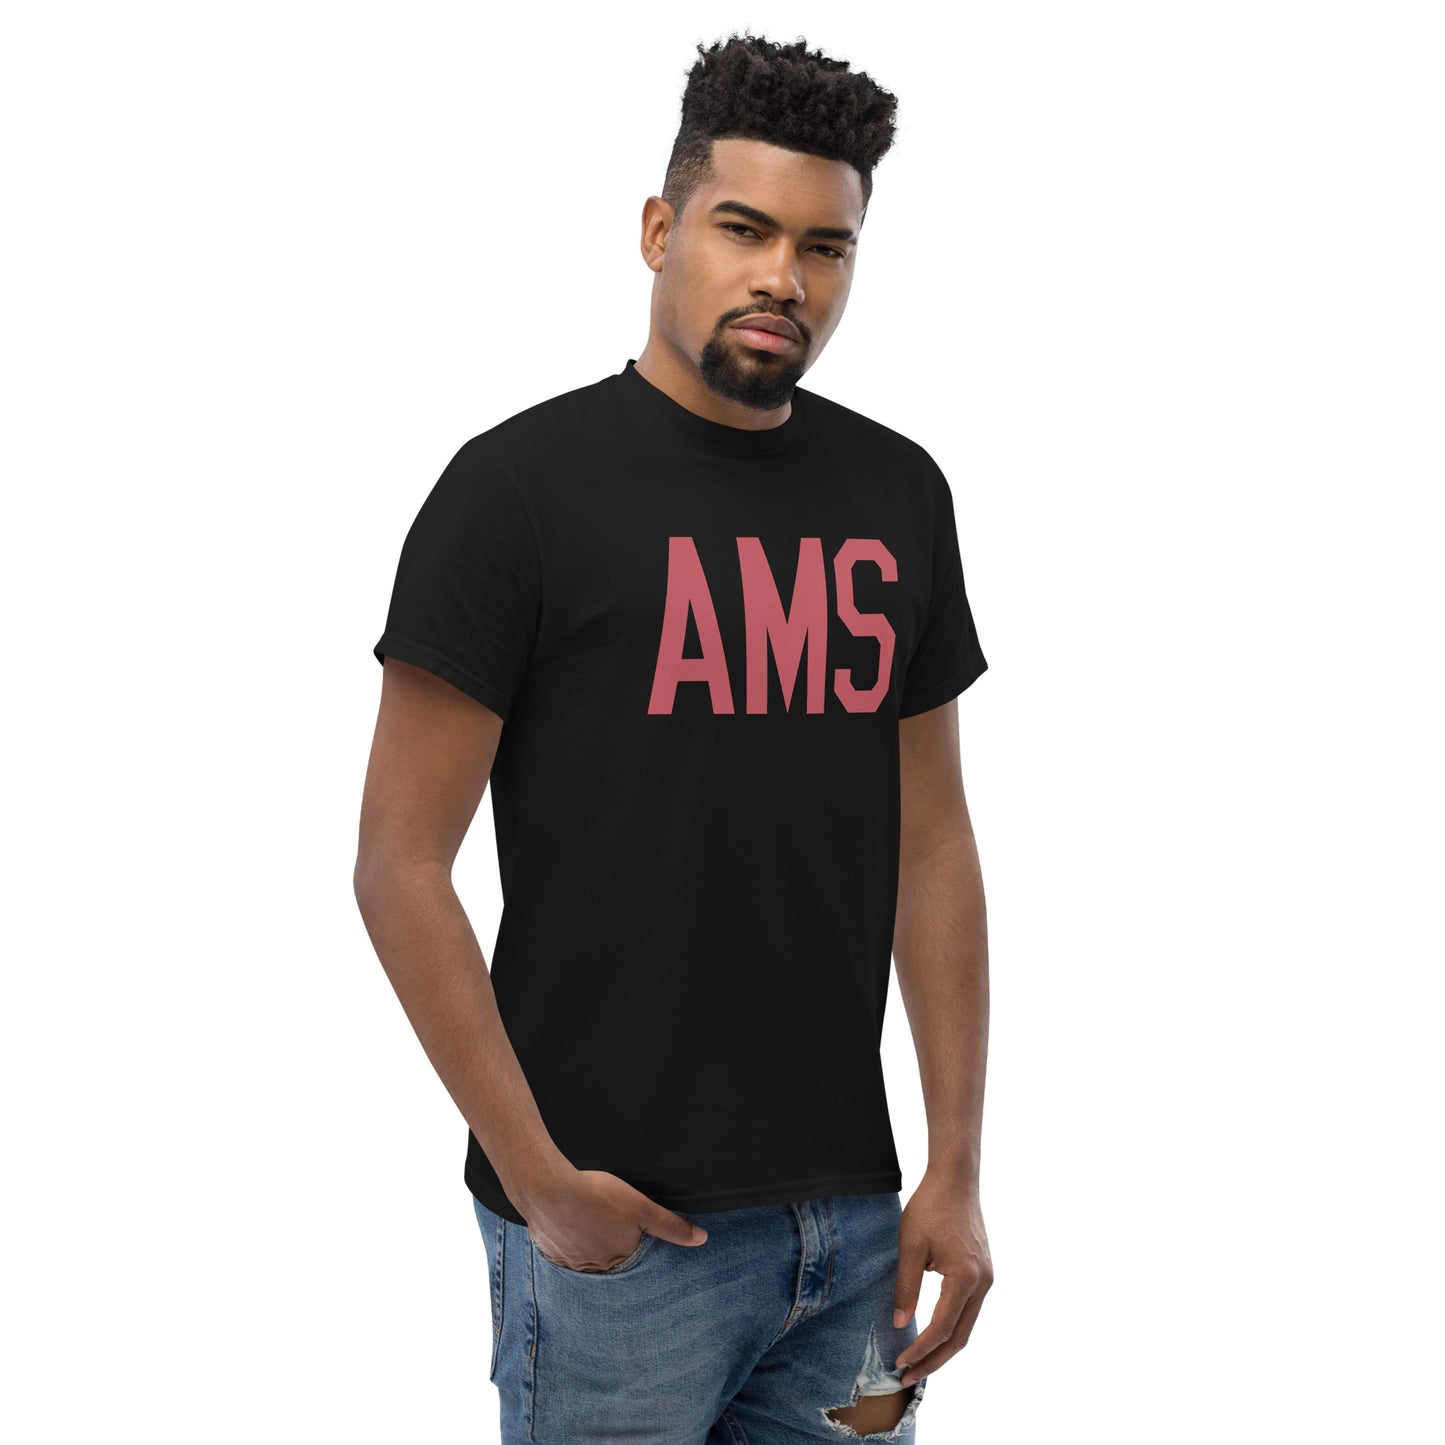 Aviation Enthusiast Men's Tee - Deep Pink Graphic • AMS Amsterdam • YHM Designs - Image 08